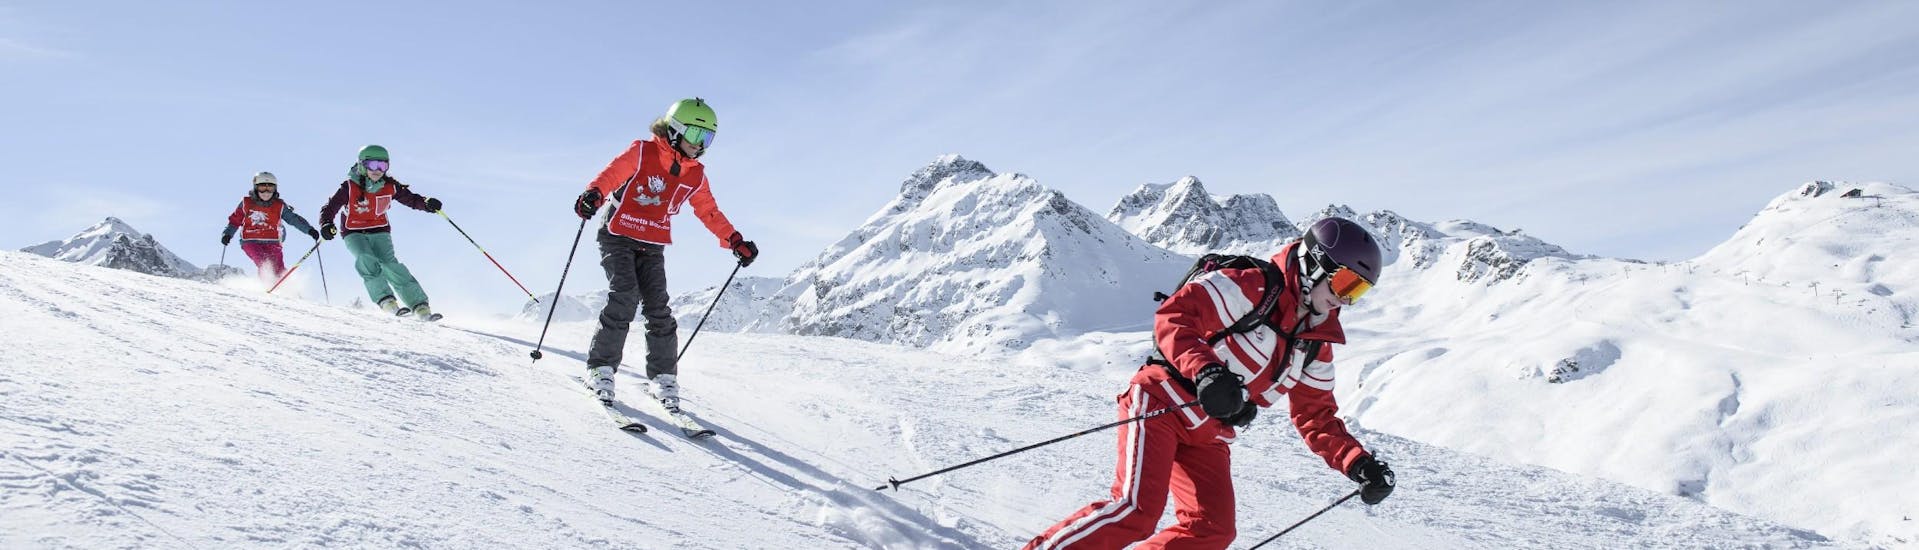 During their Kids Ski Lessons (from 5 y.) for Skiers with Experience a group of children is exploring the slopes of Silvretta Montafon alongside their experienced ski instructor from Skischule Schruns.